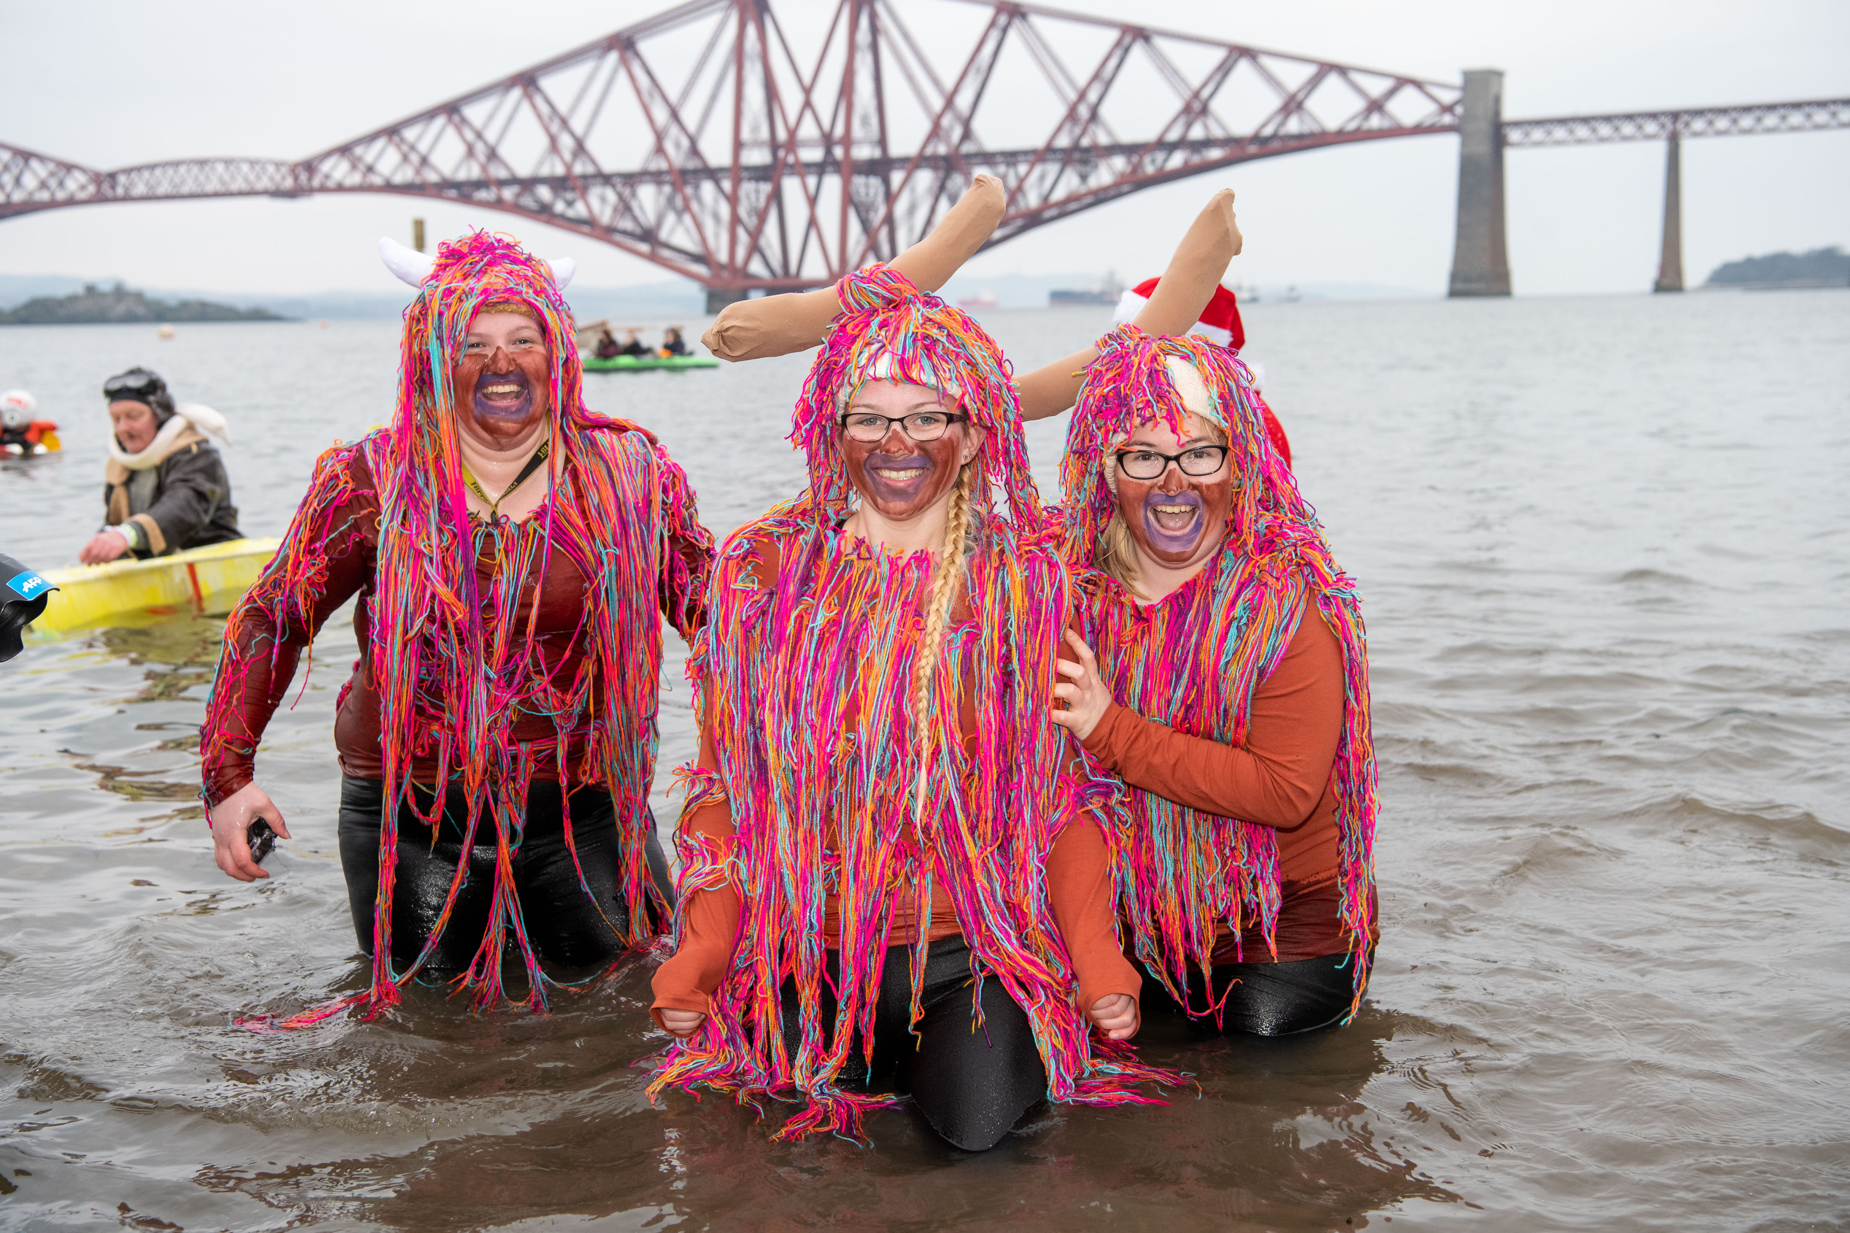 Festive: The annual Loony Dook at South Queensferry.